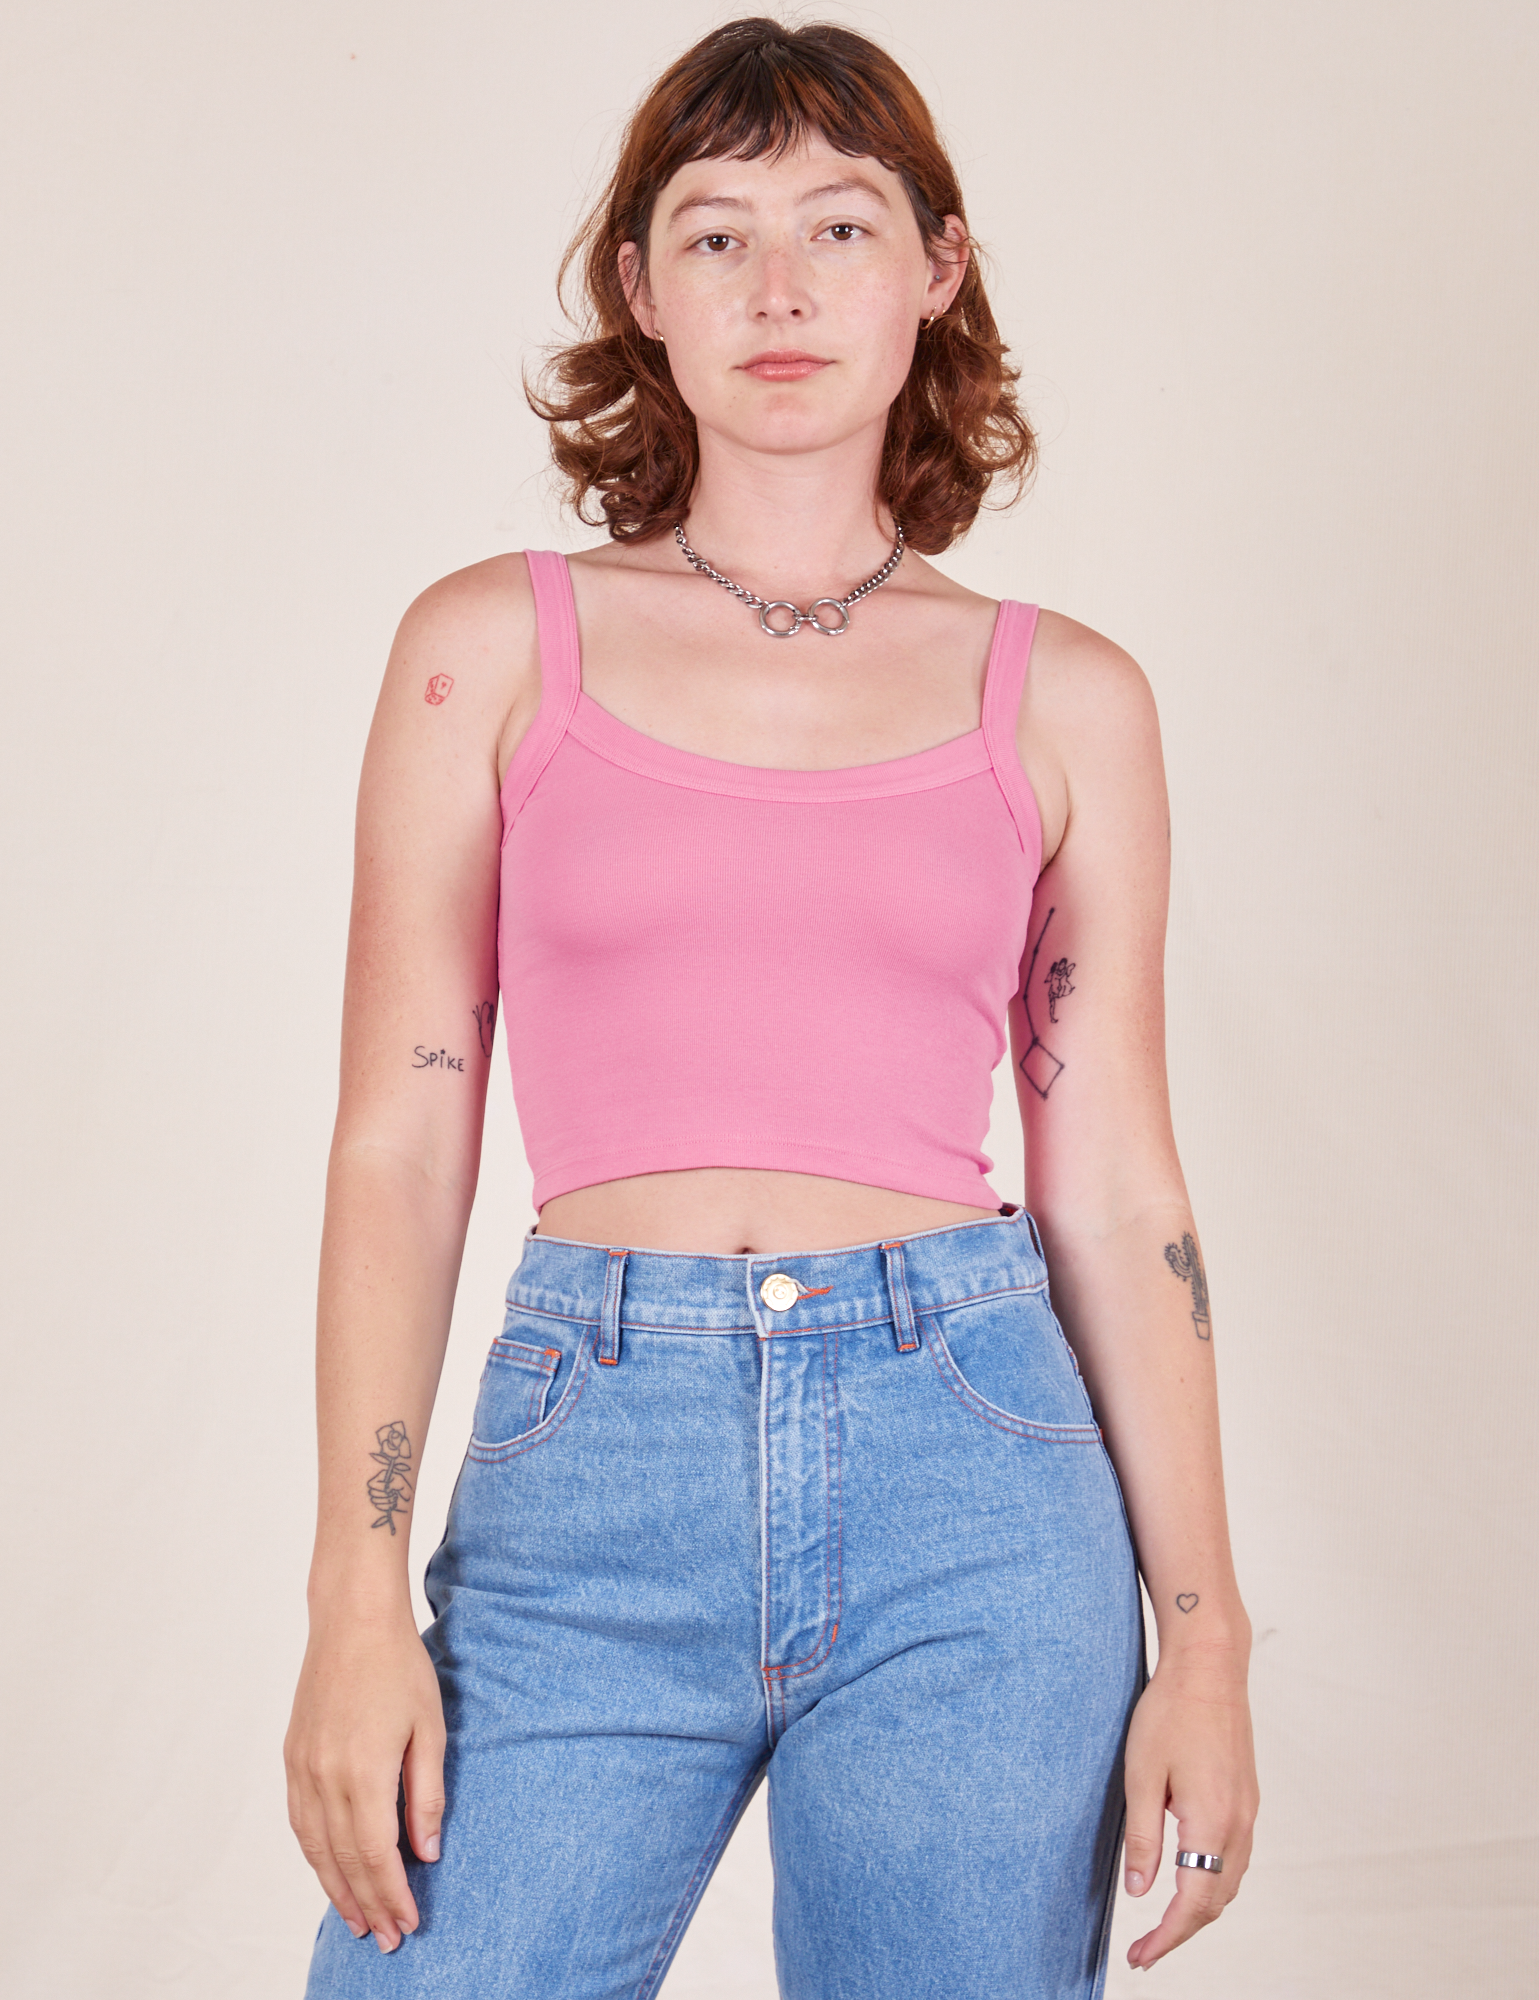 Alex is 5&#39;8&quot; and wearing P Cropped Cami in Bubblegum Pink paired with light wash Frontier Jeans